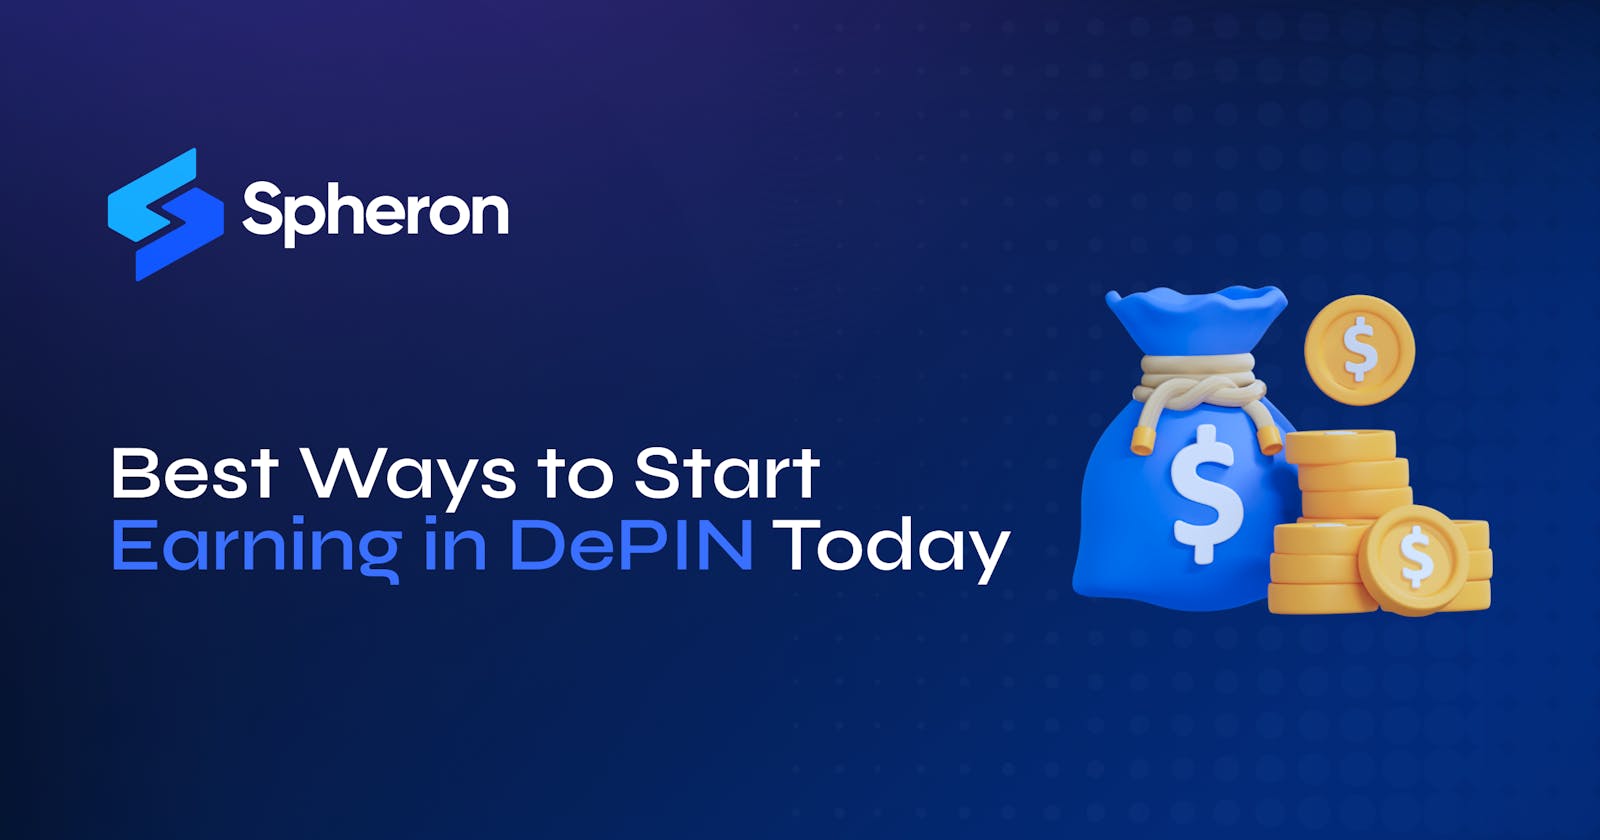 Best Ways to Start Earning in DePIN Today